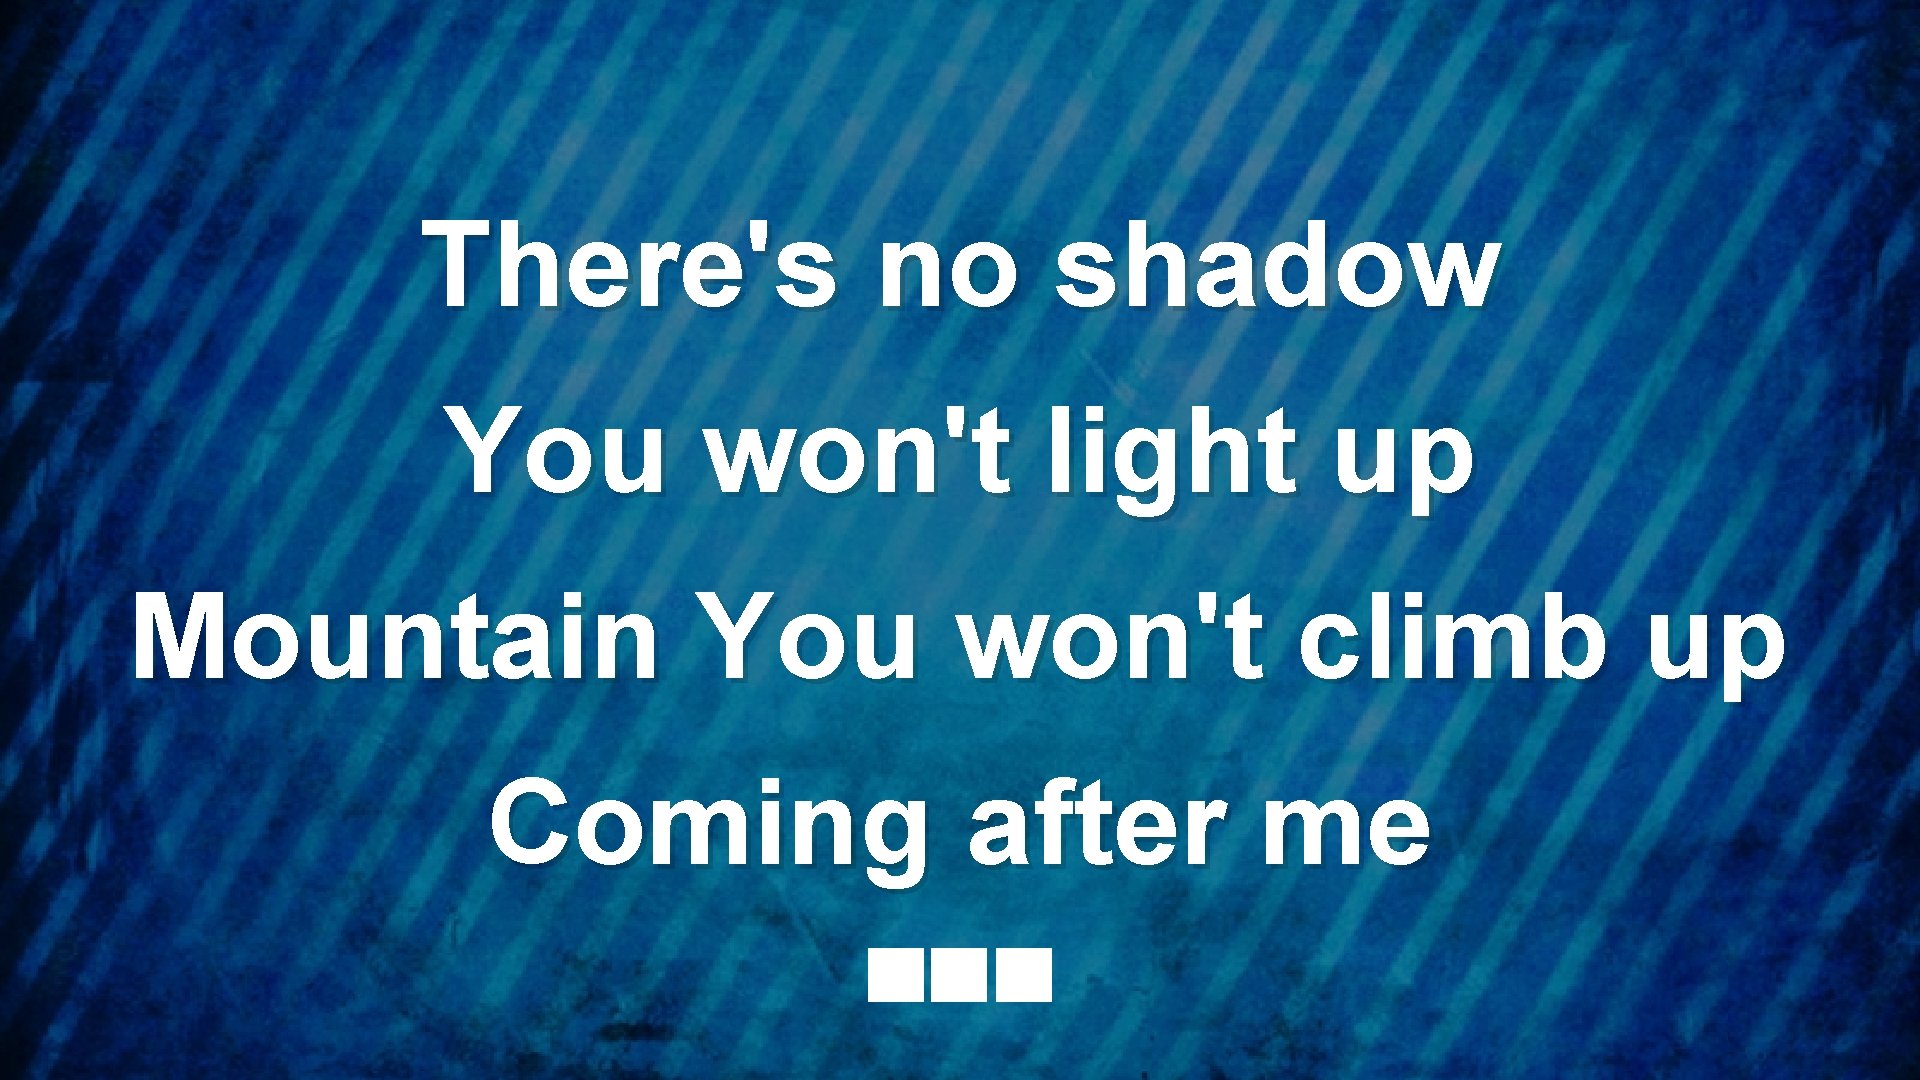 There's no shadow You won't light up Mountain You won't climb up Coming after